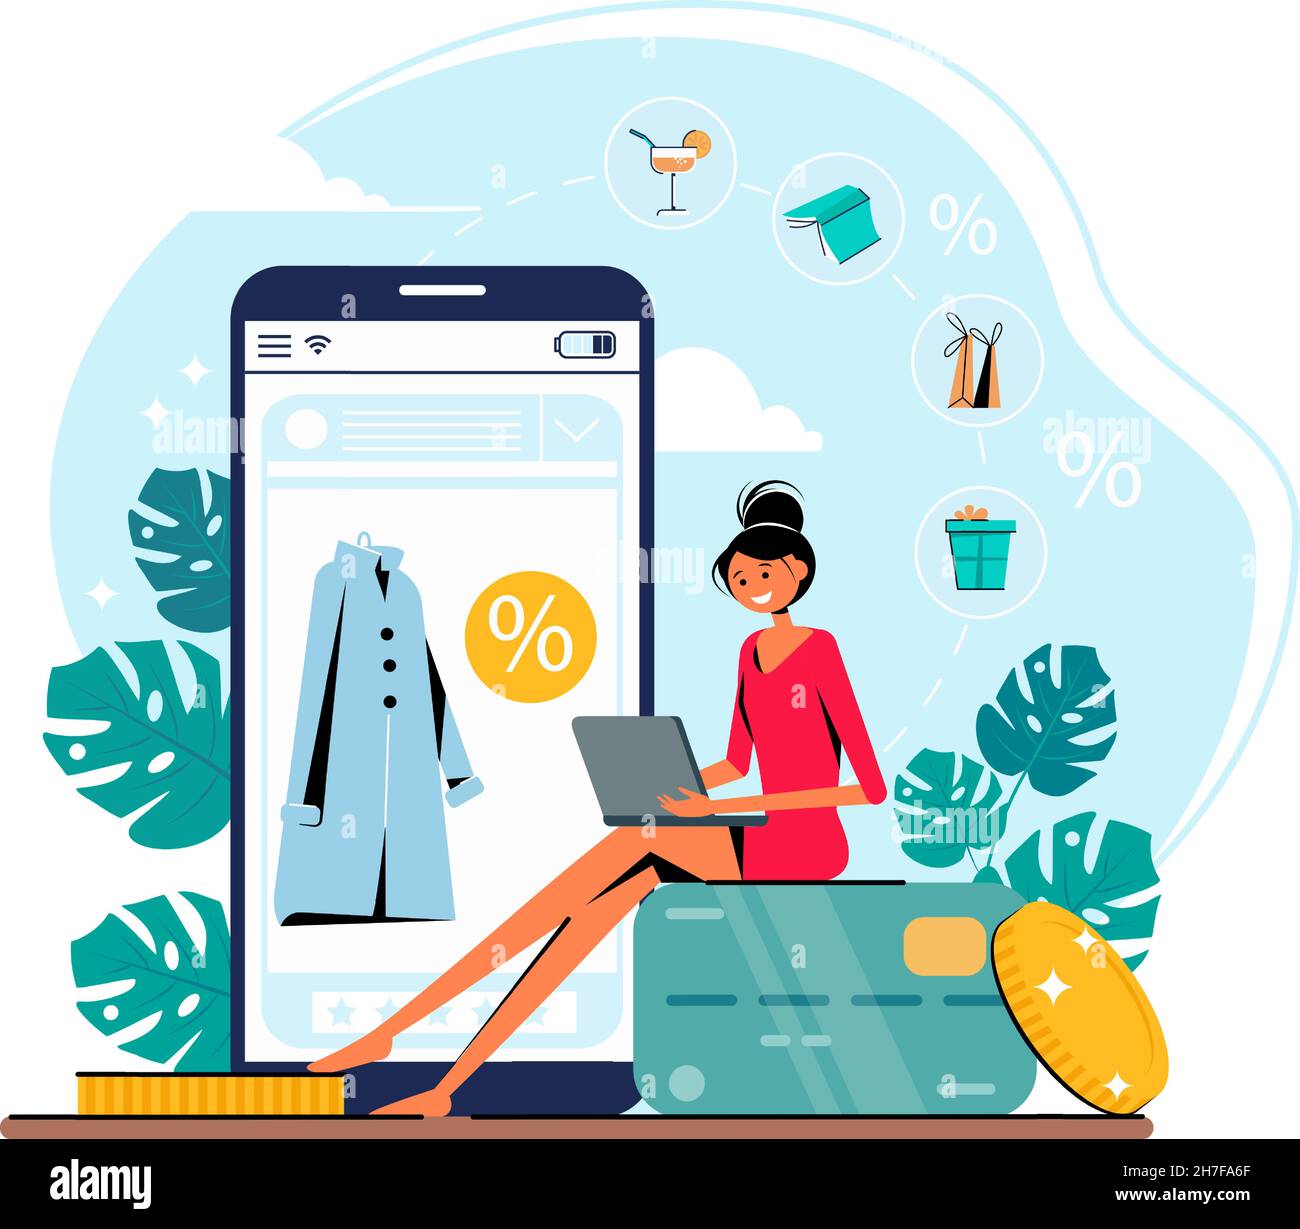 Online shopping concept with woman holding a laptop. Coins, smartphone and credit card. Special offer, discount. Vector illustration template. Stock Vector